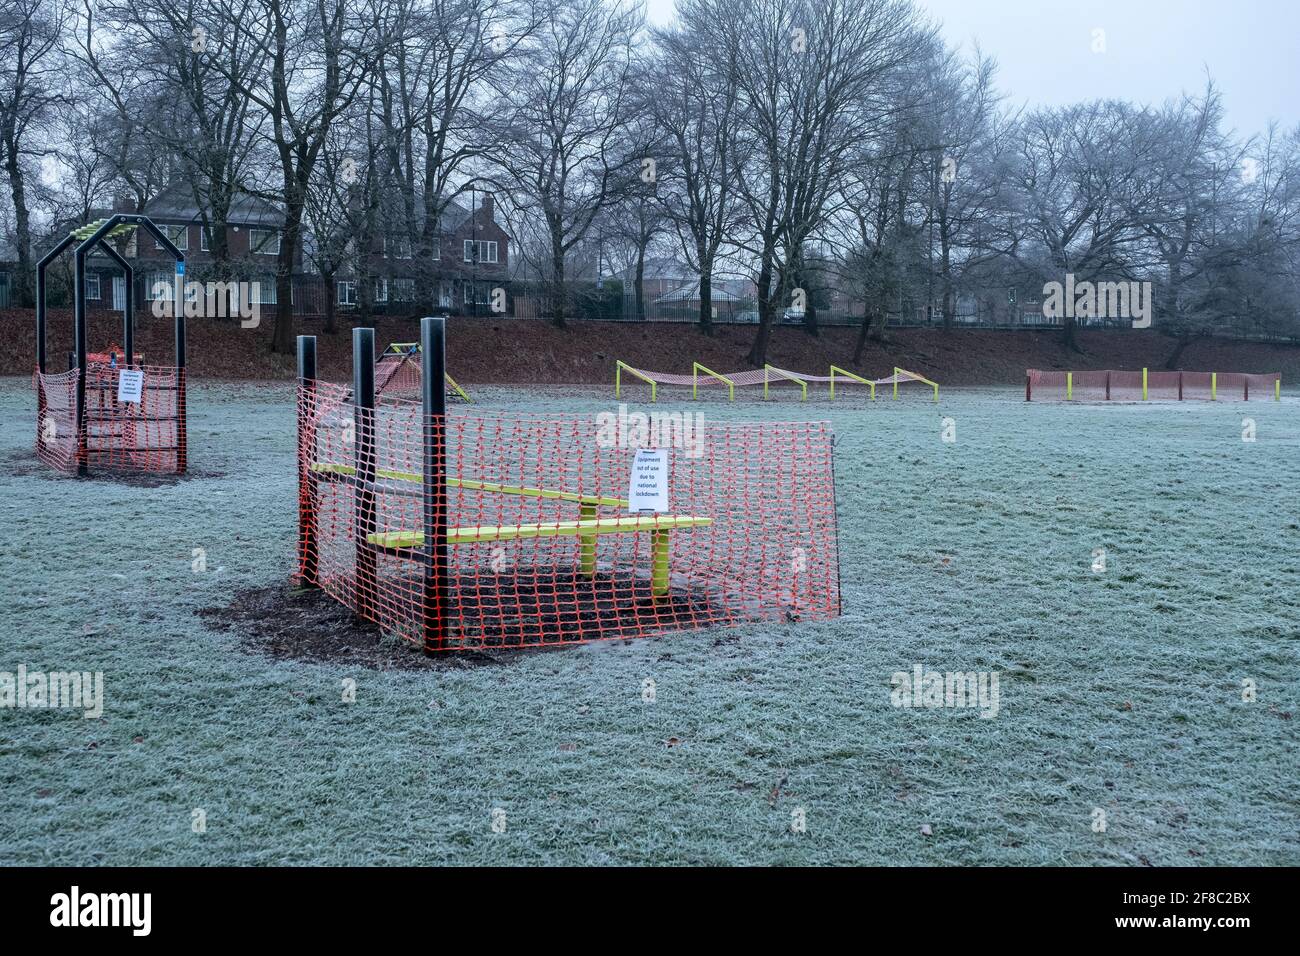 Free exercise obstacles closed off and banned from public us due to Covid-19 pandemic, Walsall. Stock Photo